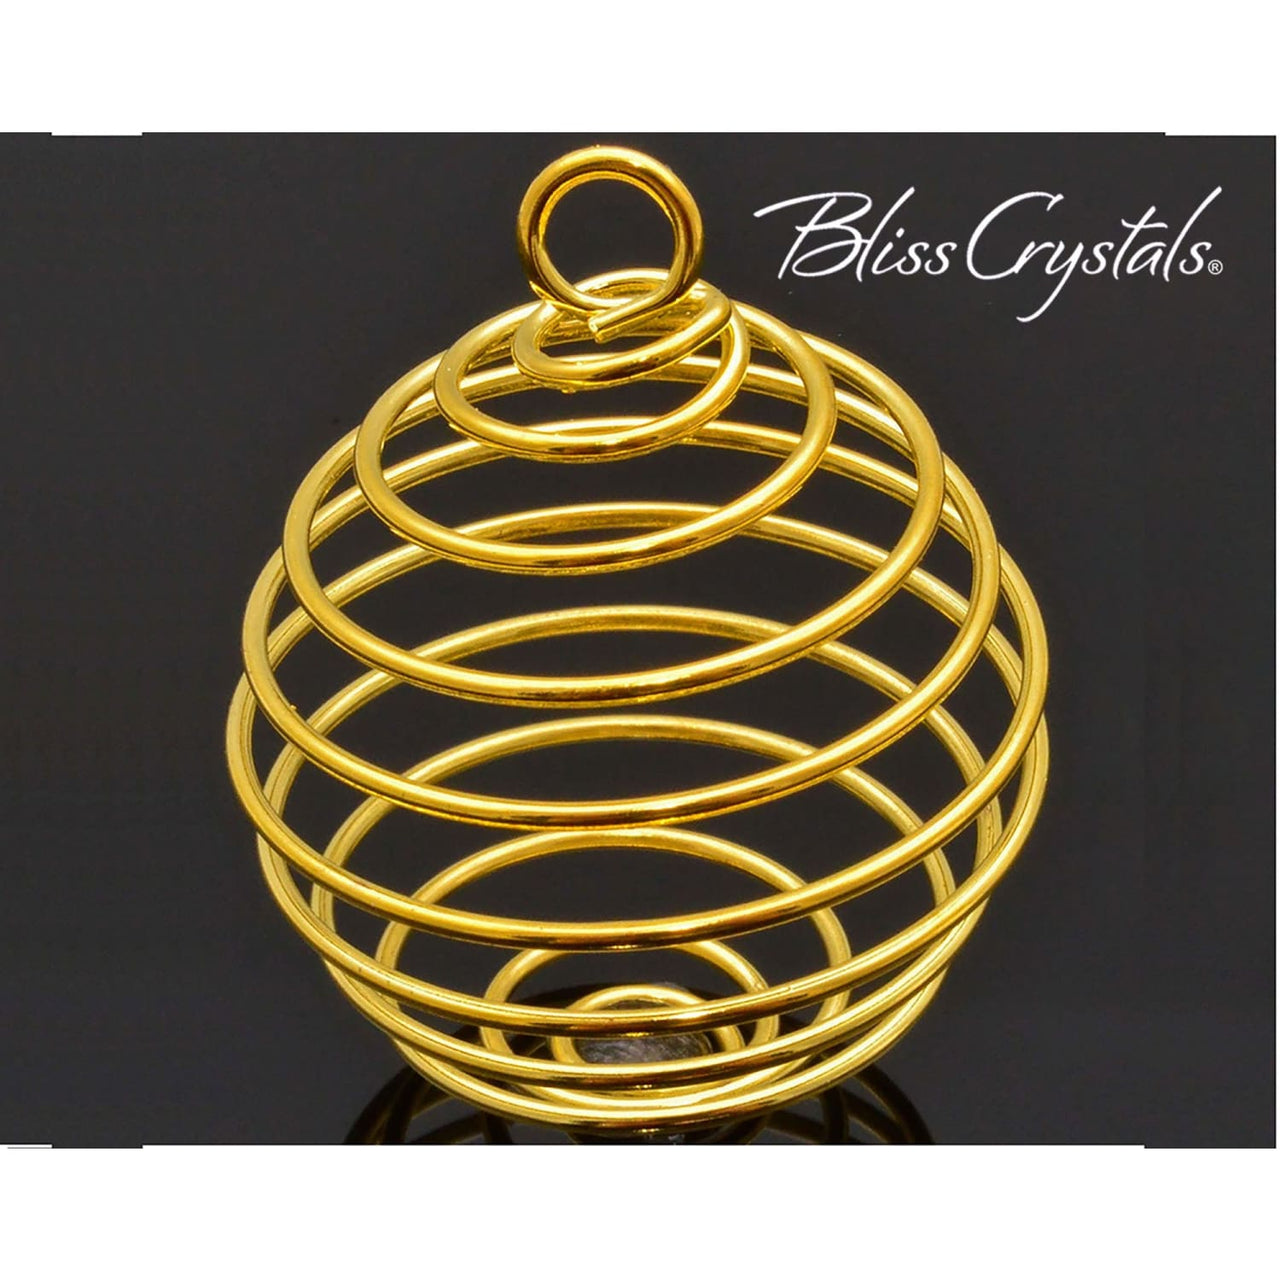 25 mm Gold Tone Spiral Cage Pendant for Crystals Tumbled 